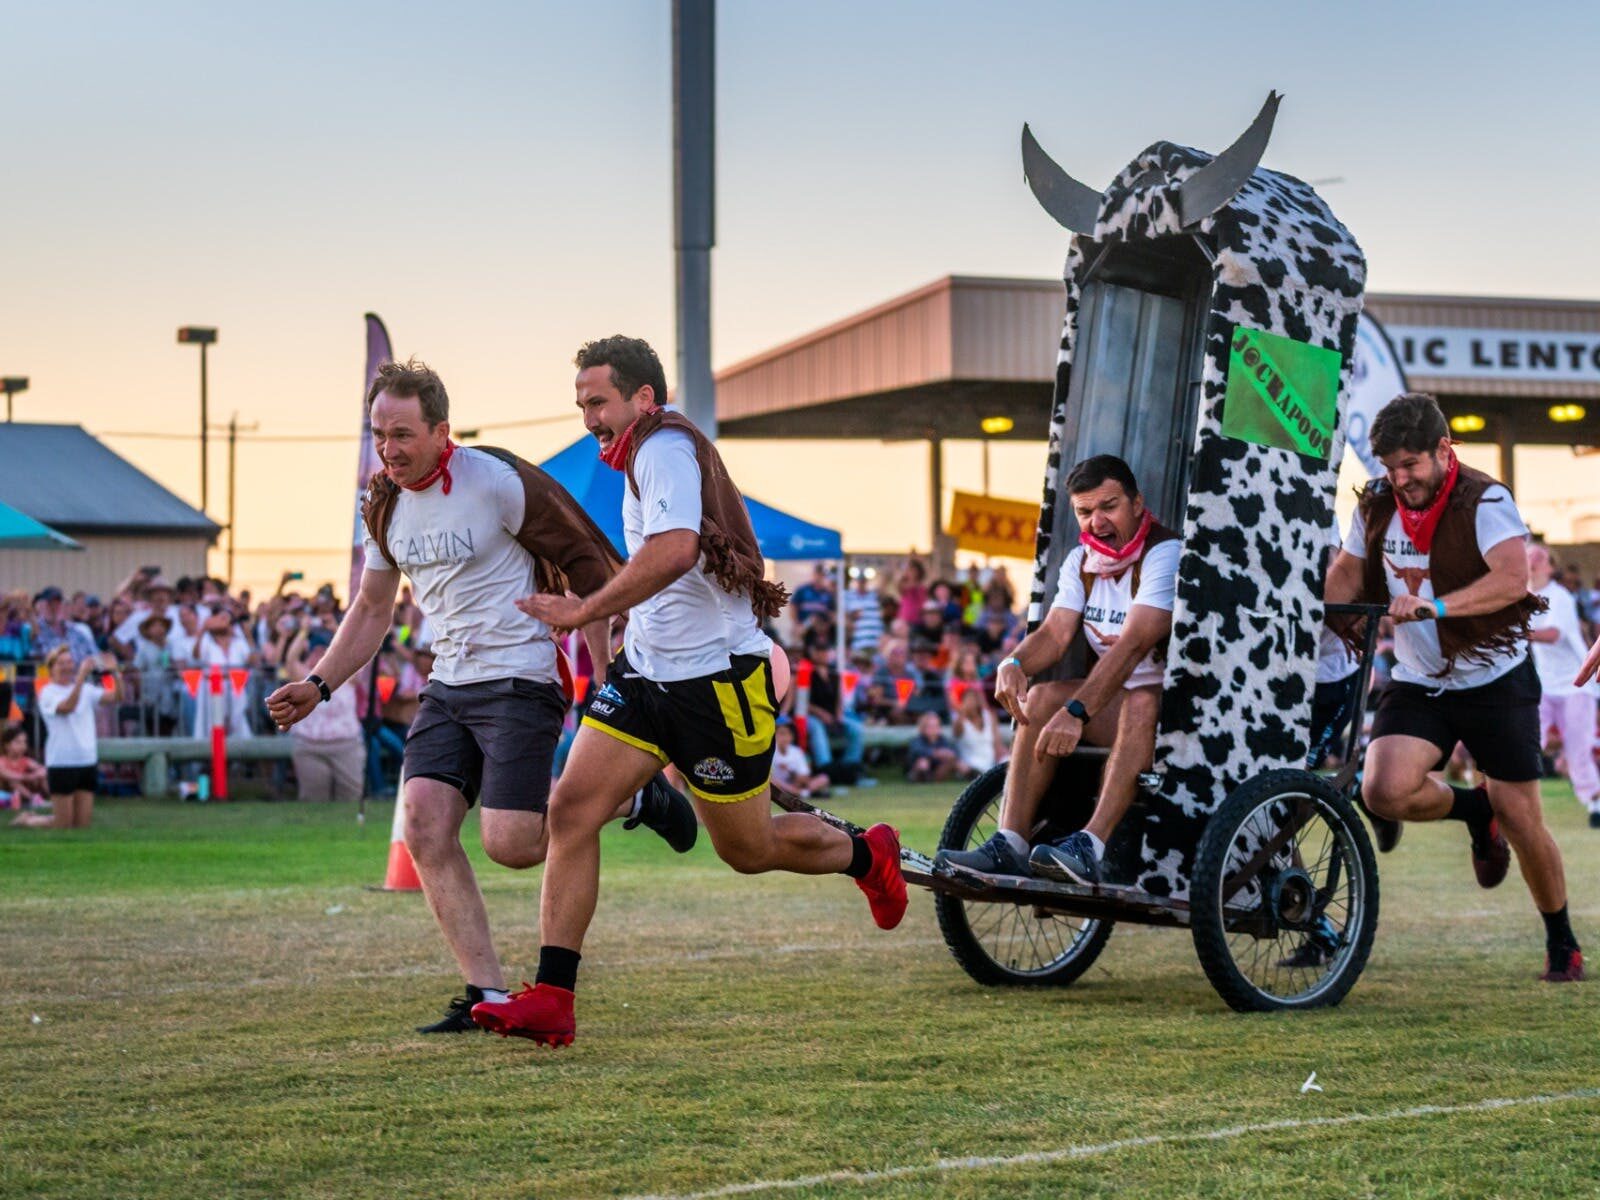 Competitors racing in Australian Dunny Derby